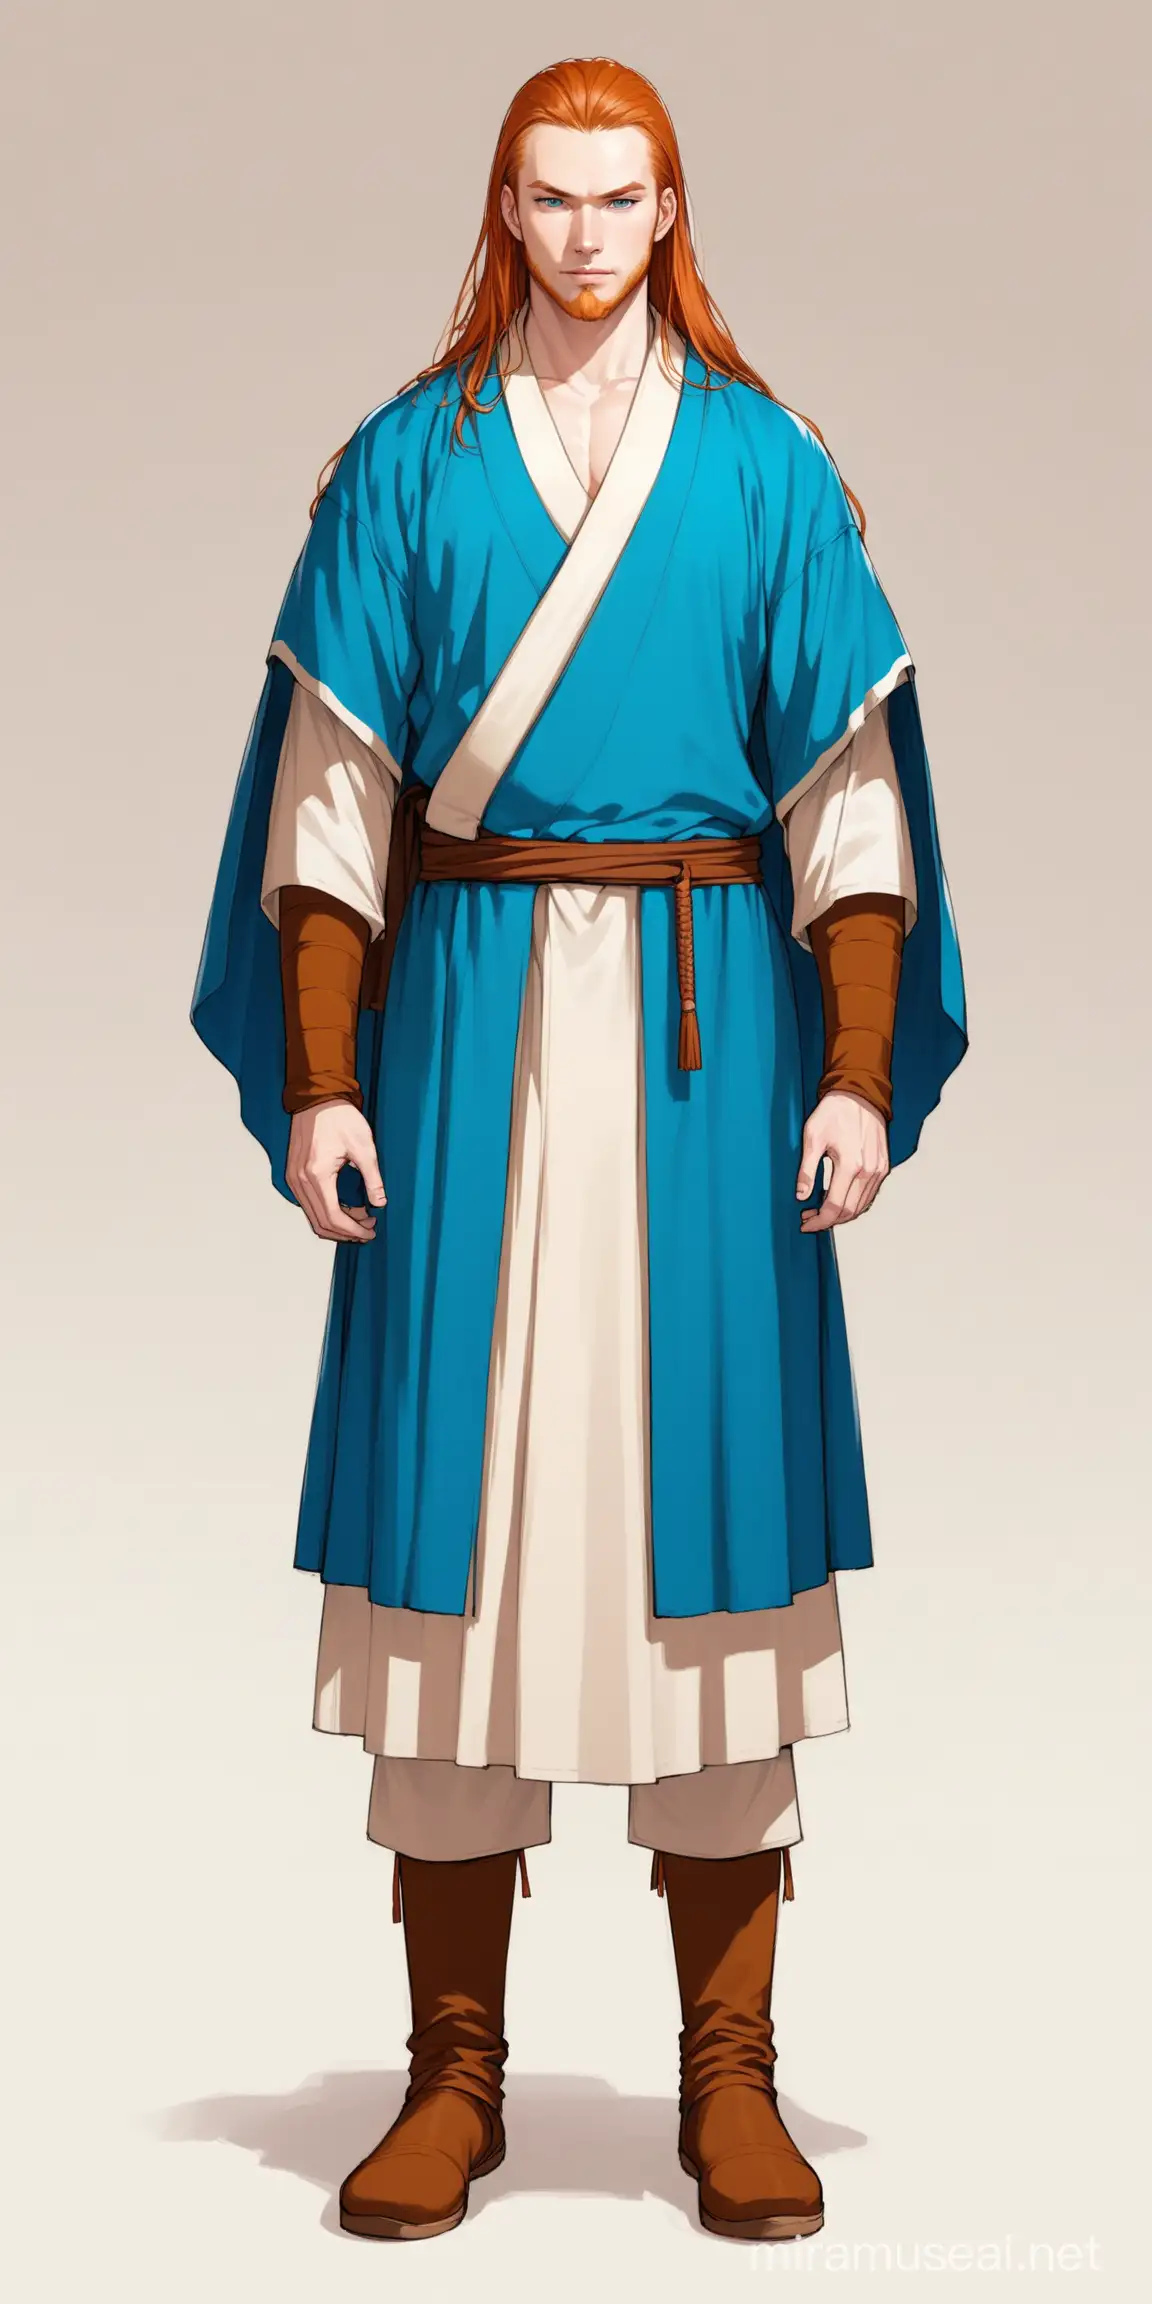 caucasian man, warrior monk, white and blue robe, ginger hair, brown boots, standing, long hair